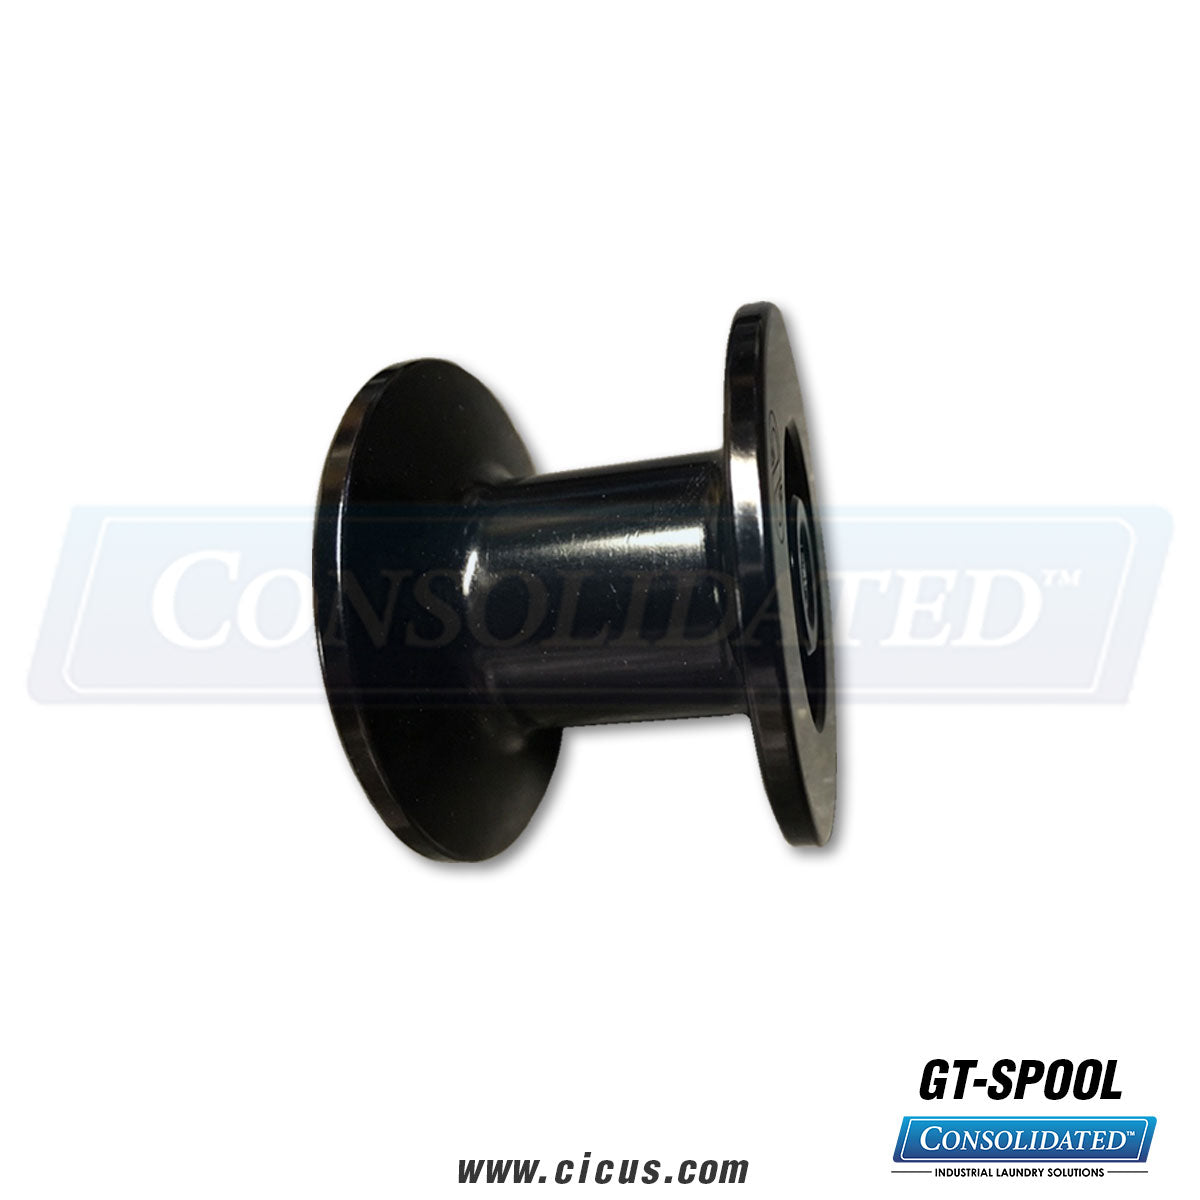 CNC Billet Anodized Guide Tape Roller [GT-SPOOL]CNC Billet Anodized Guide Tape Roller [GT-SPOOL] - Front view